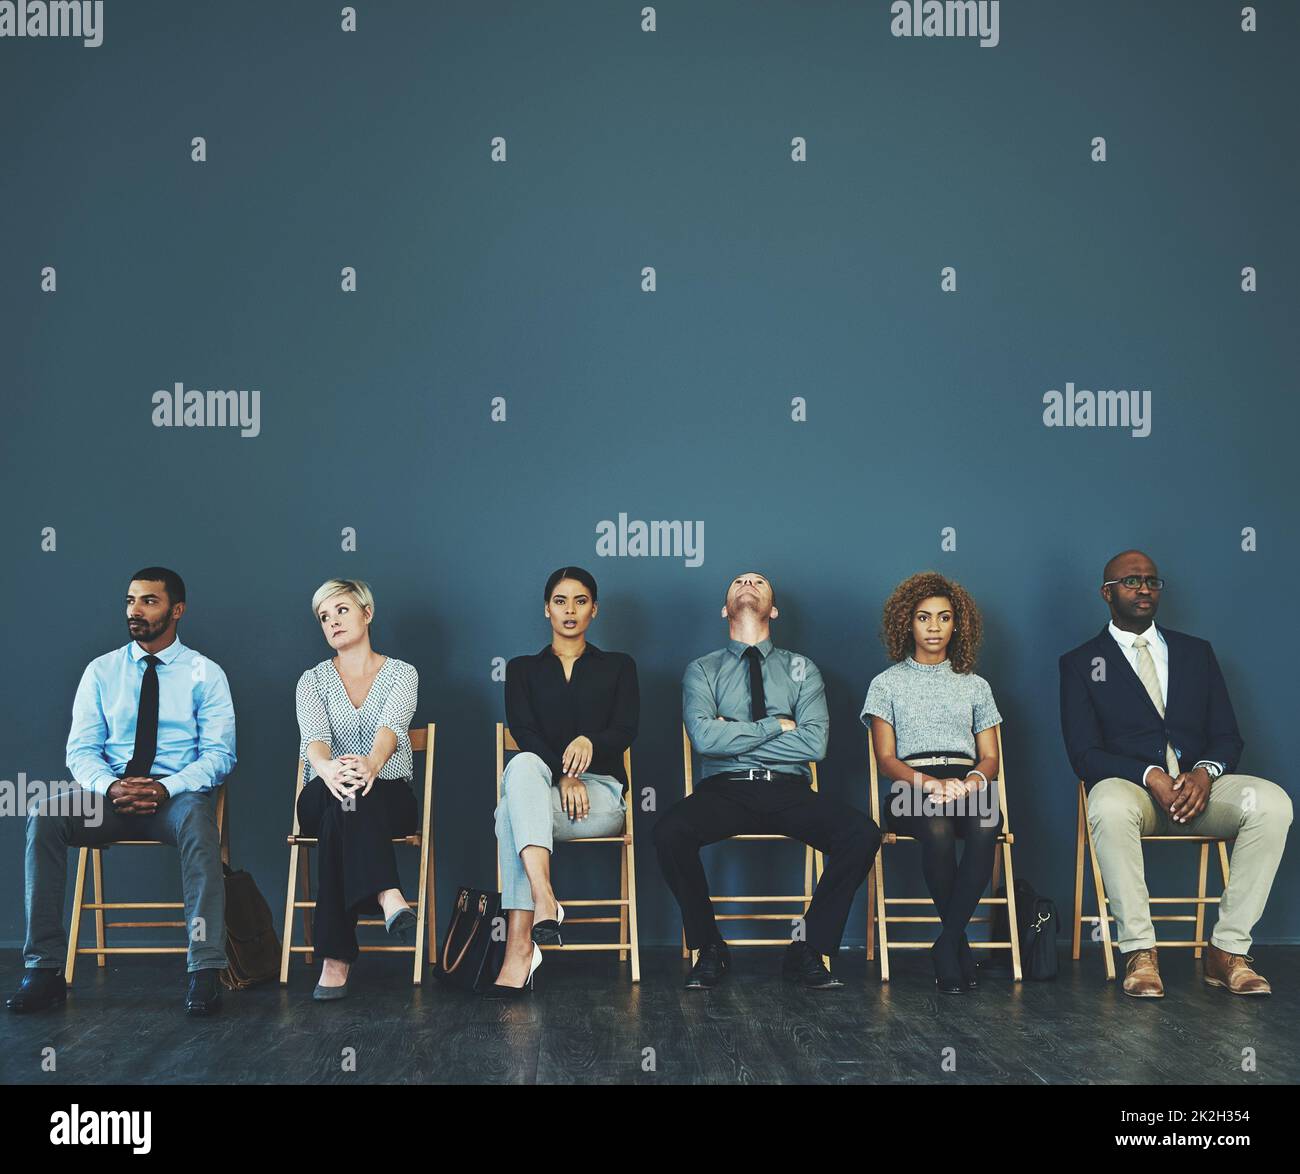 Consider everything a test, even the possible extended 10-minute wait. Shot of a group of well-dressed business people seated in line while waiting to be interview. Stock Photo